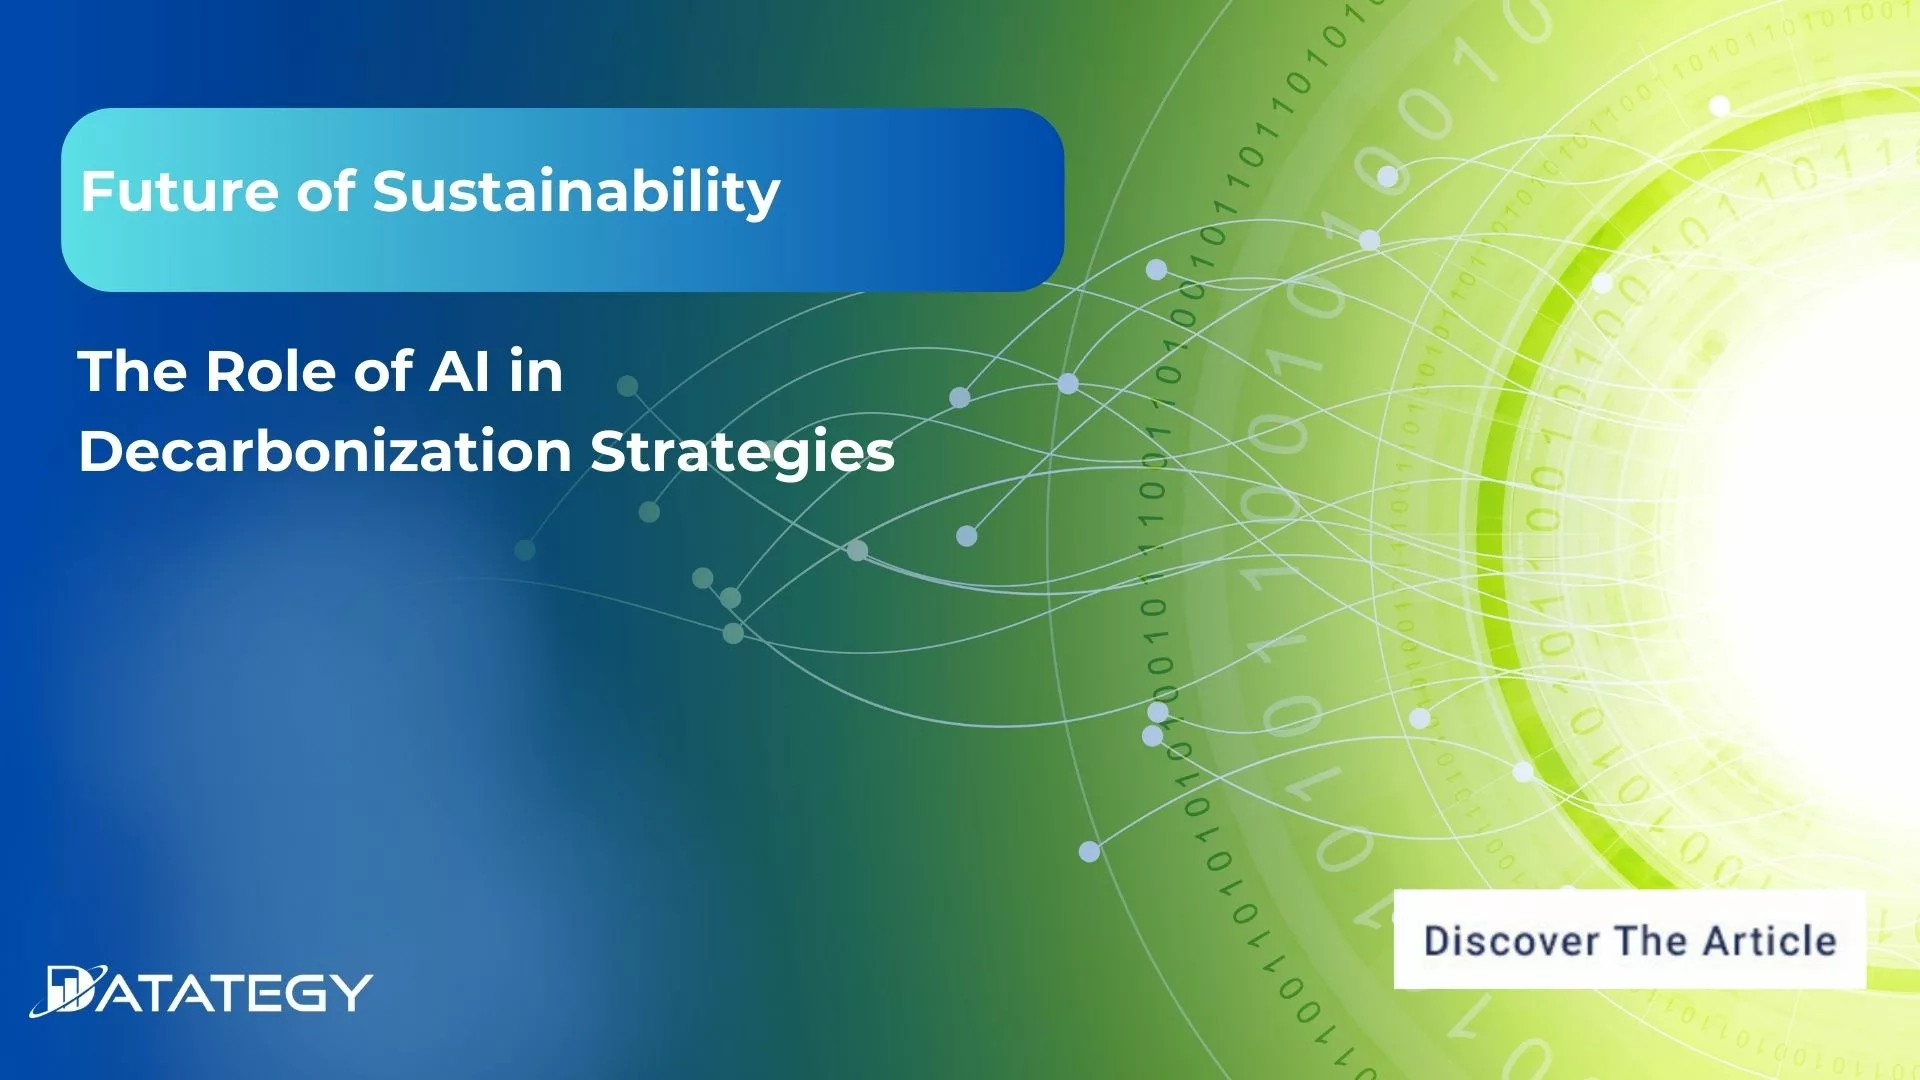 Future of Sustainability: The Role of AI in Decarbonization Strategies